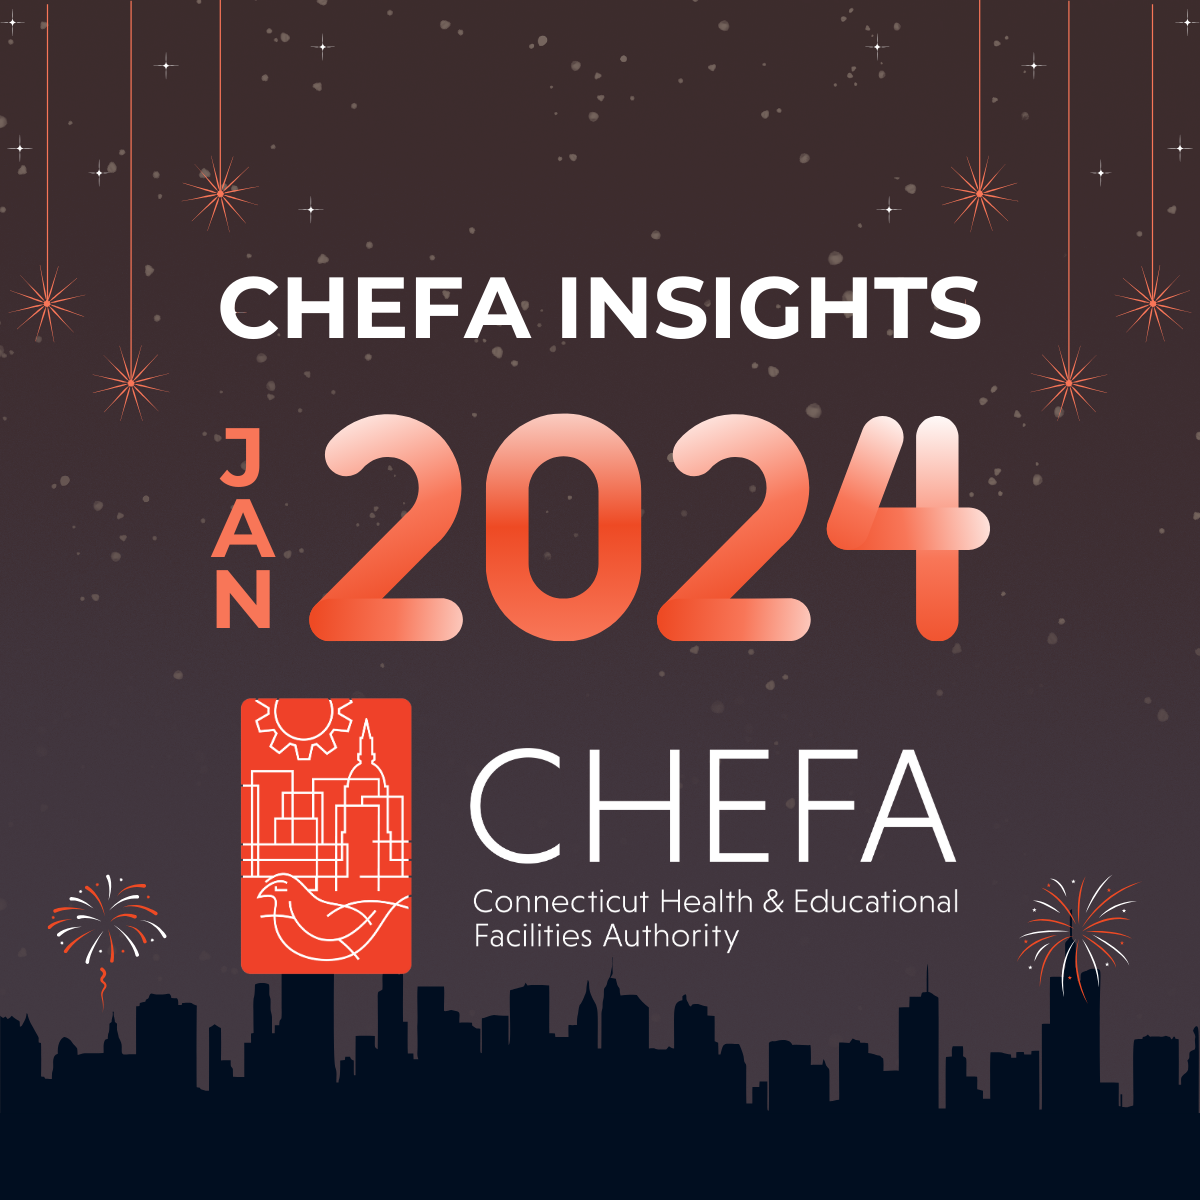 2024 New Year's graphic with the CHEFA logo for CHEFA Insights